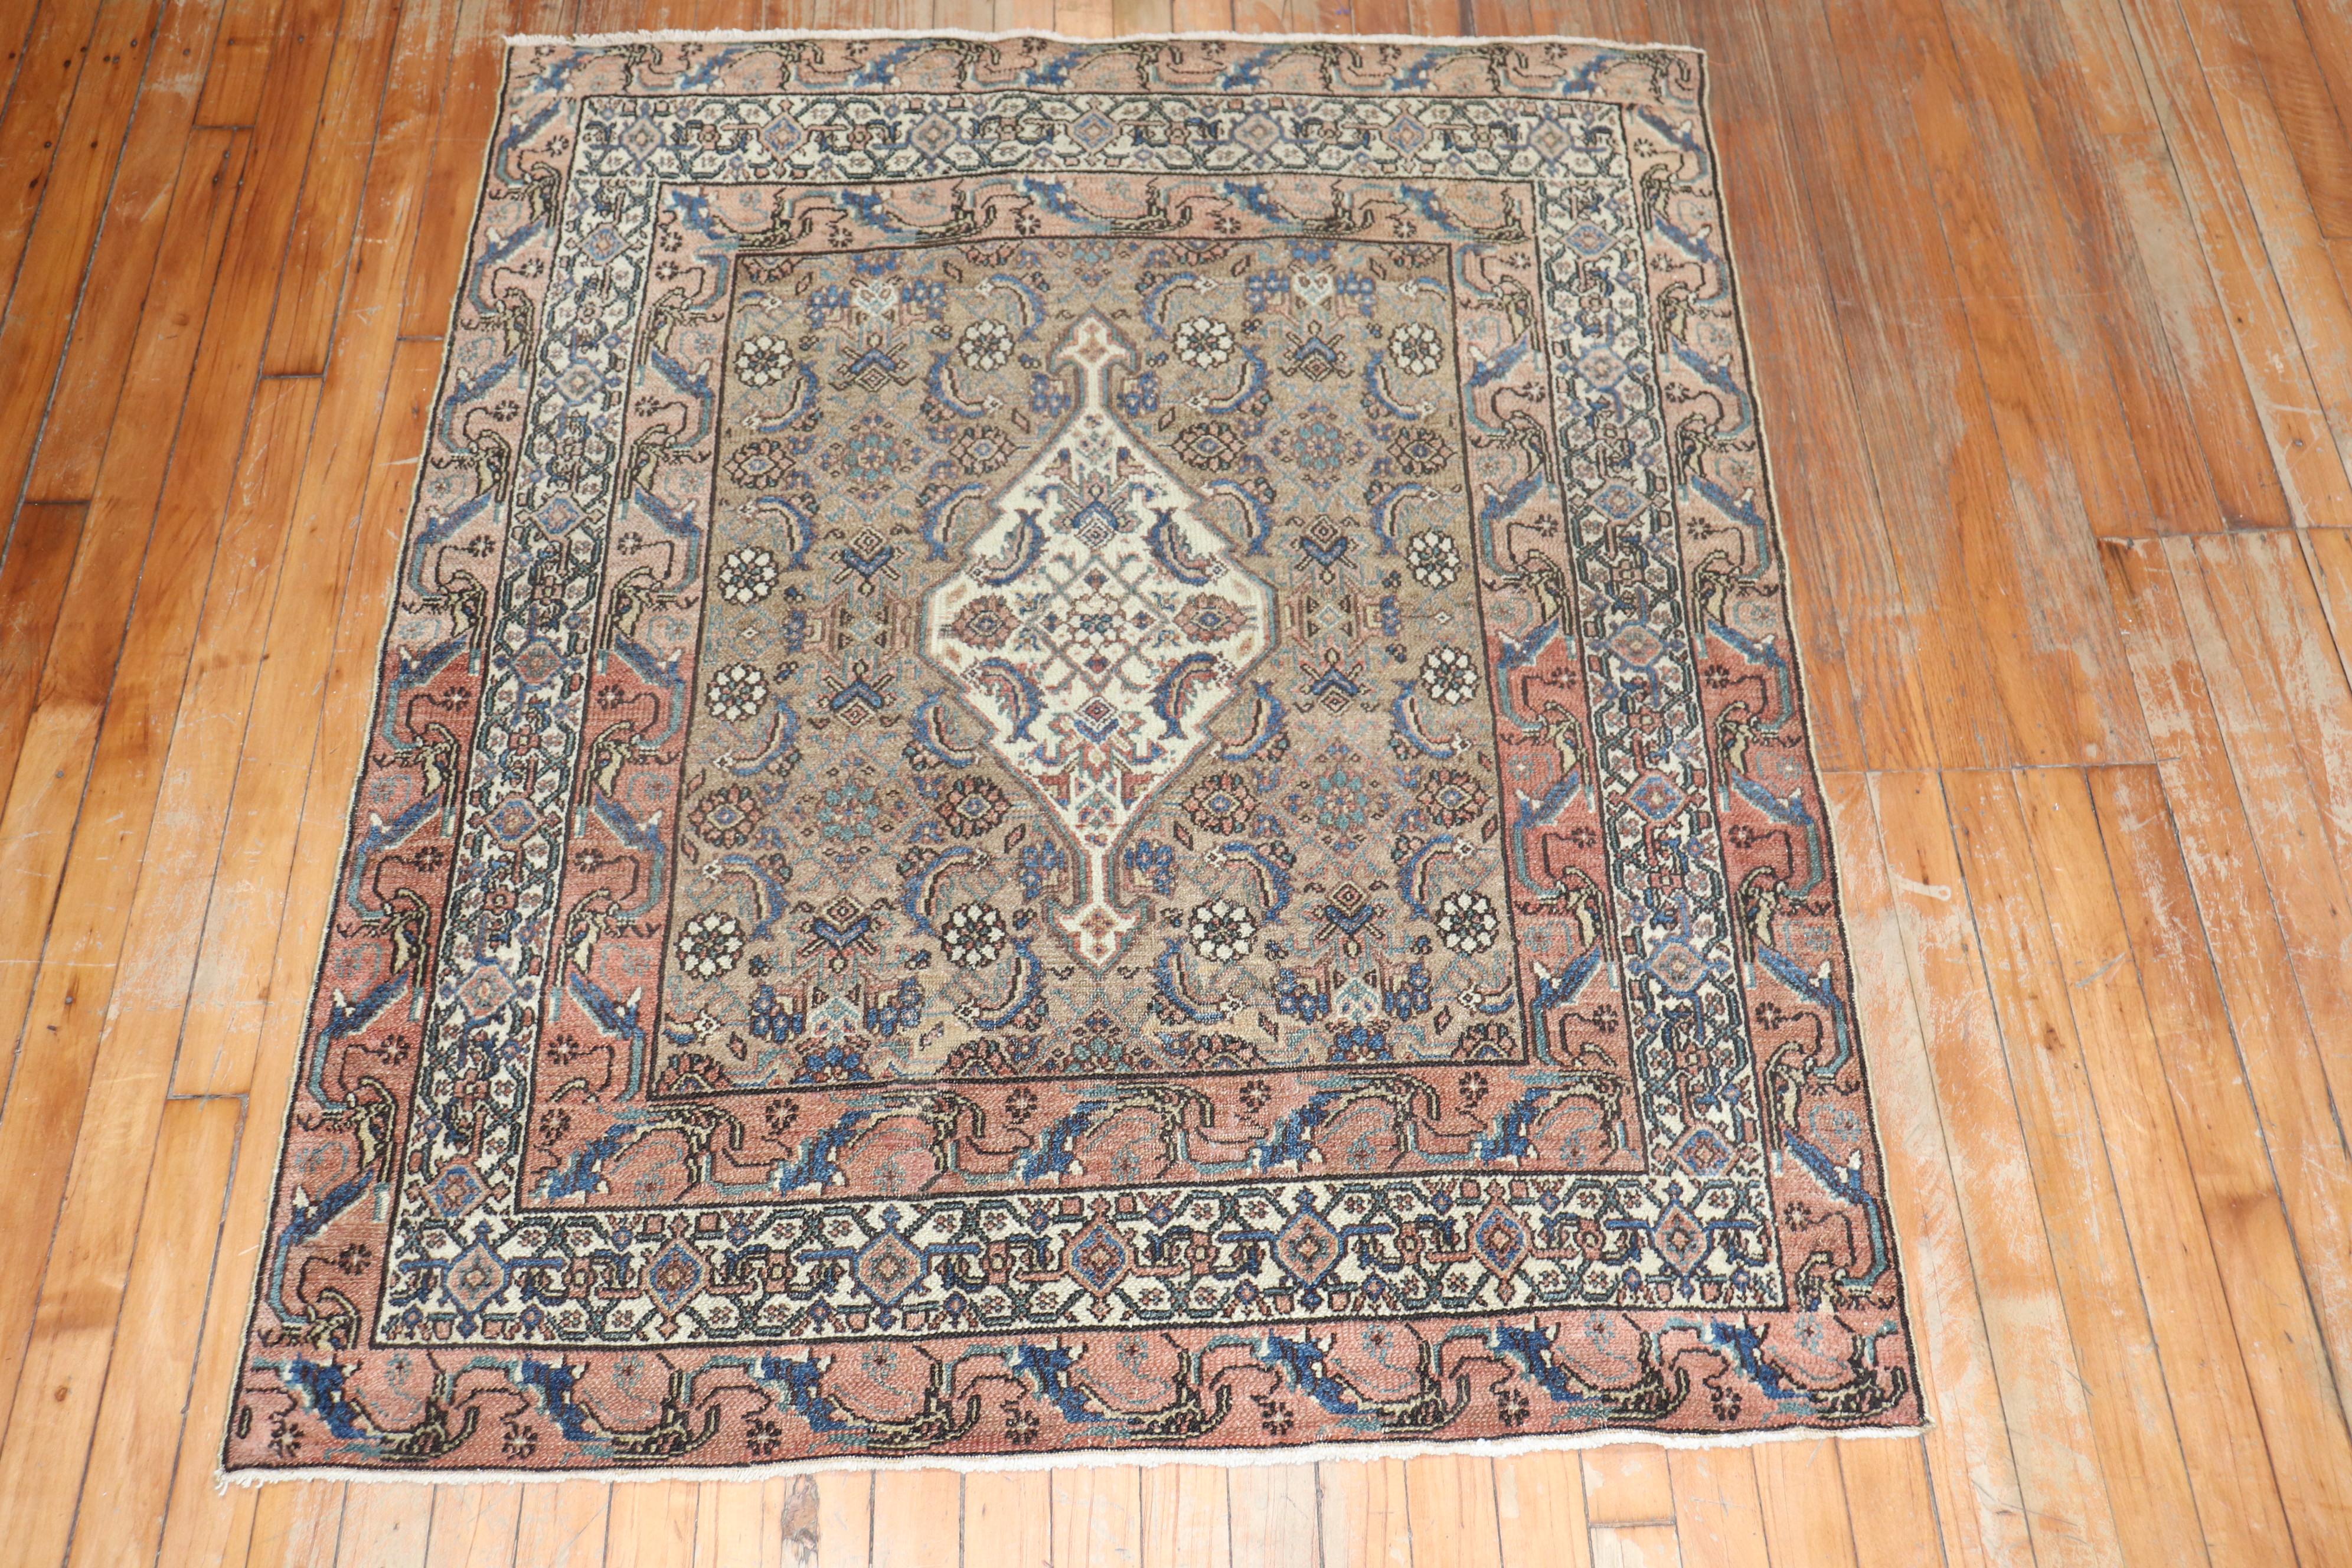 an early 20th Century Persian Senneh Bibikabad square Rug in predominant brown and copper tones

Measures: 3'8'' x 4'6''

Bibikabad rugs come from the Hamadan village region of western Iran. Meaning 